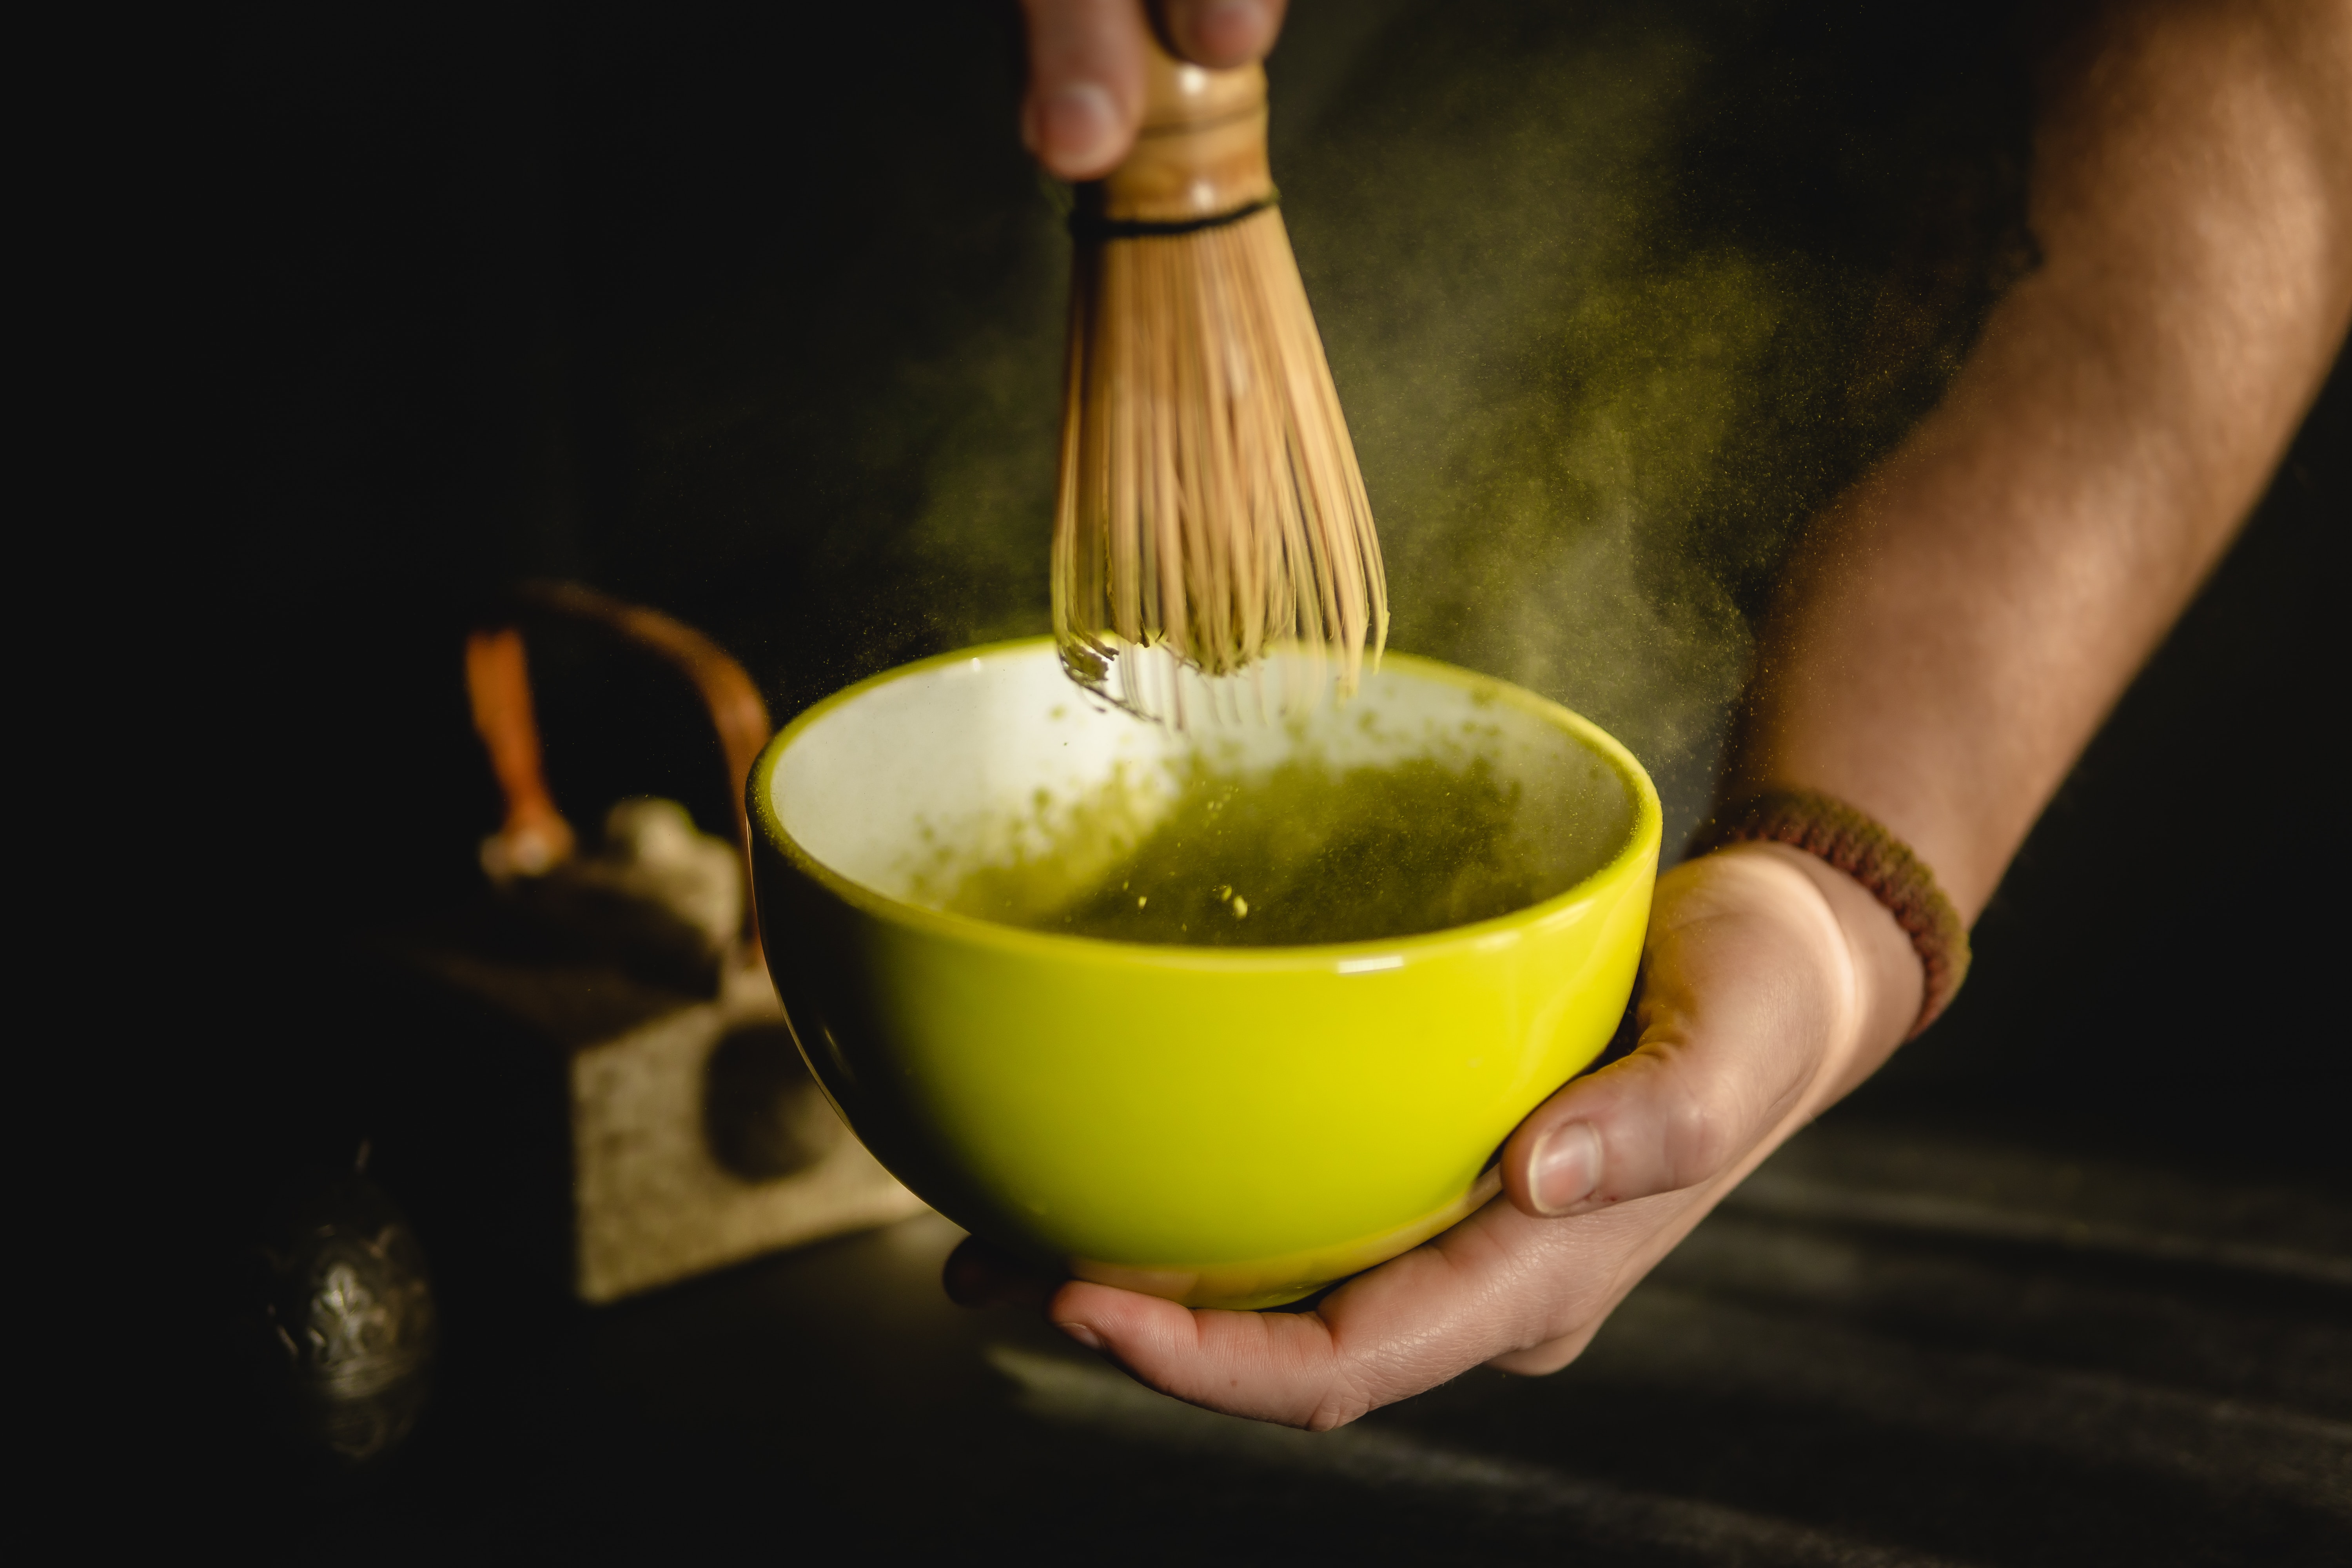 Matcha has also been shown to improve alertness, decision-making, memory and focus. Image: Sentidos Humanos / Unsplash